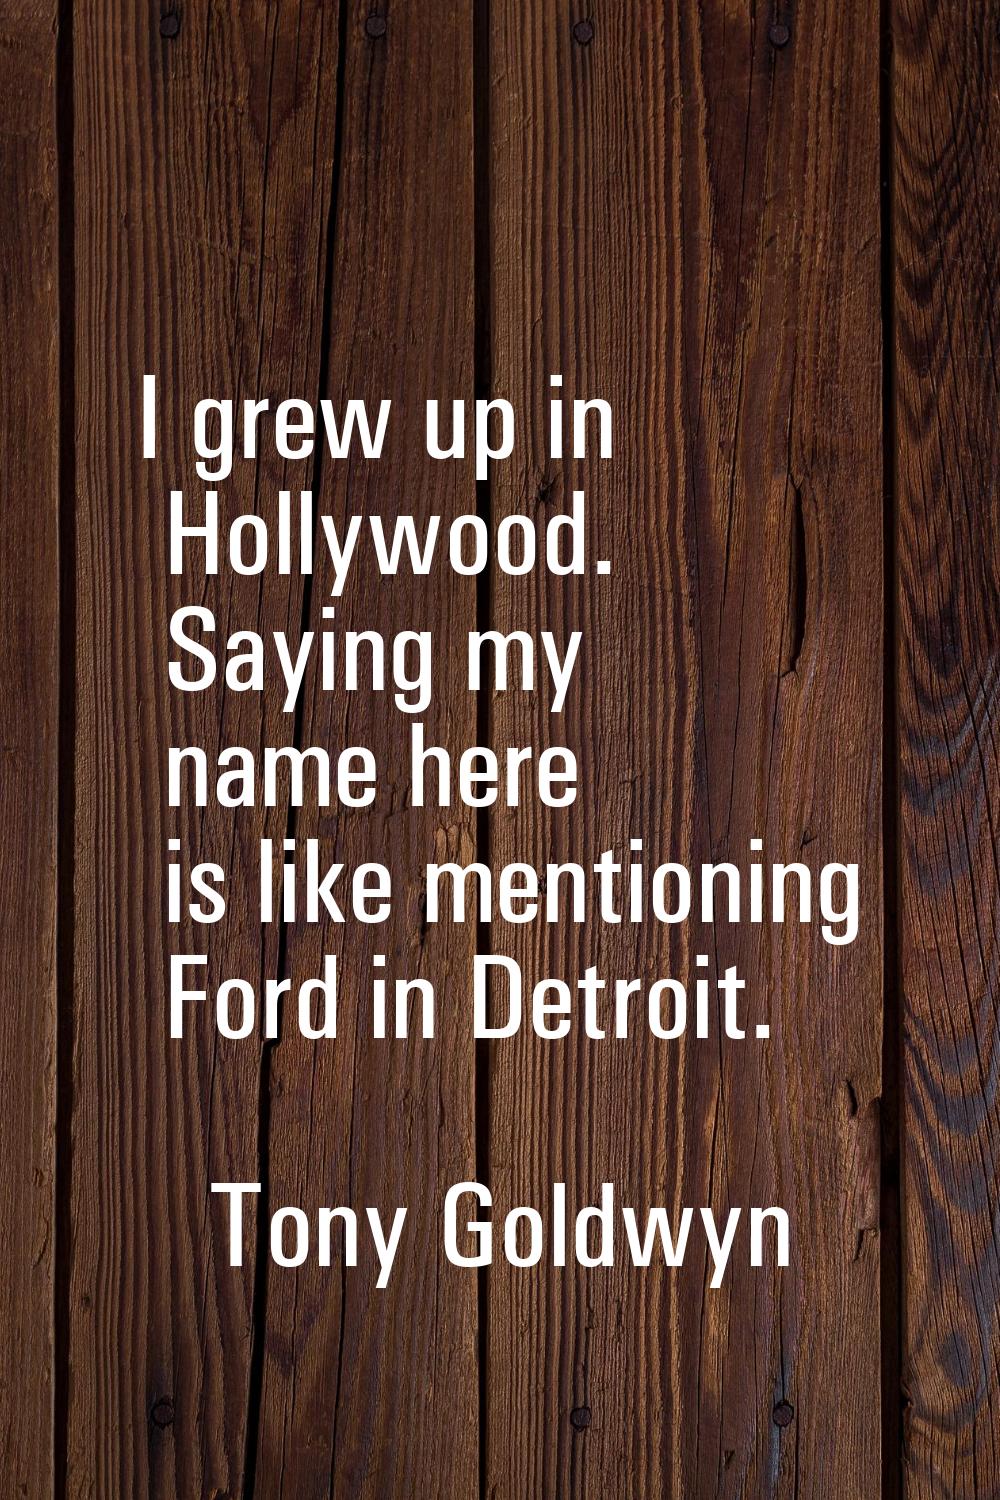 I grew up in Hollywood. Saying my name here is like mentioning Ford in Detroit.